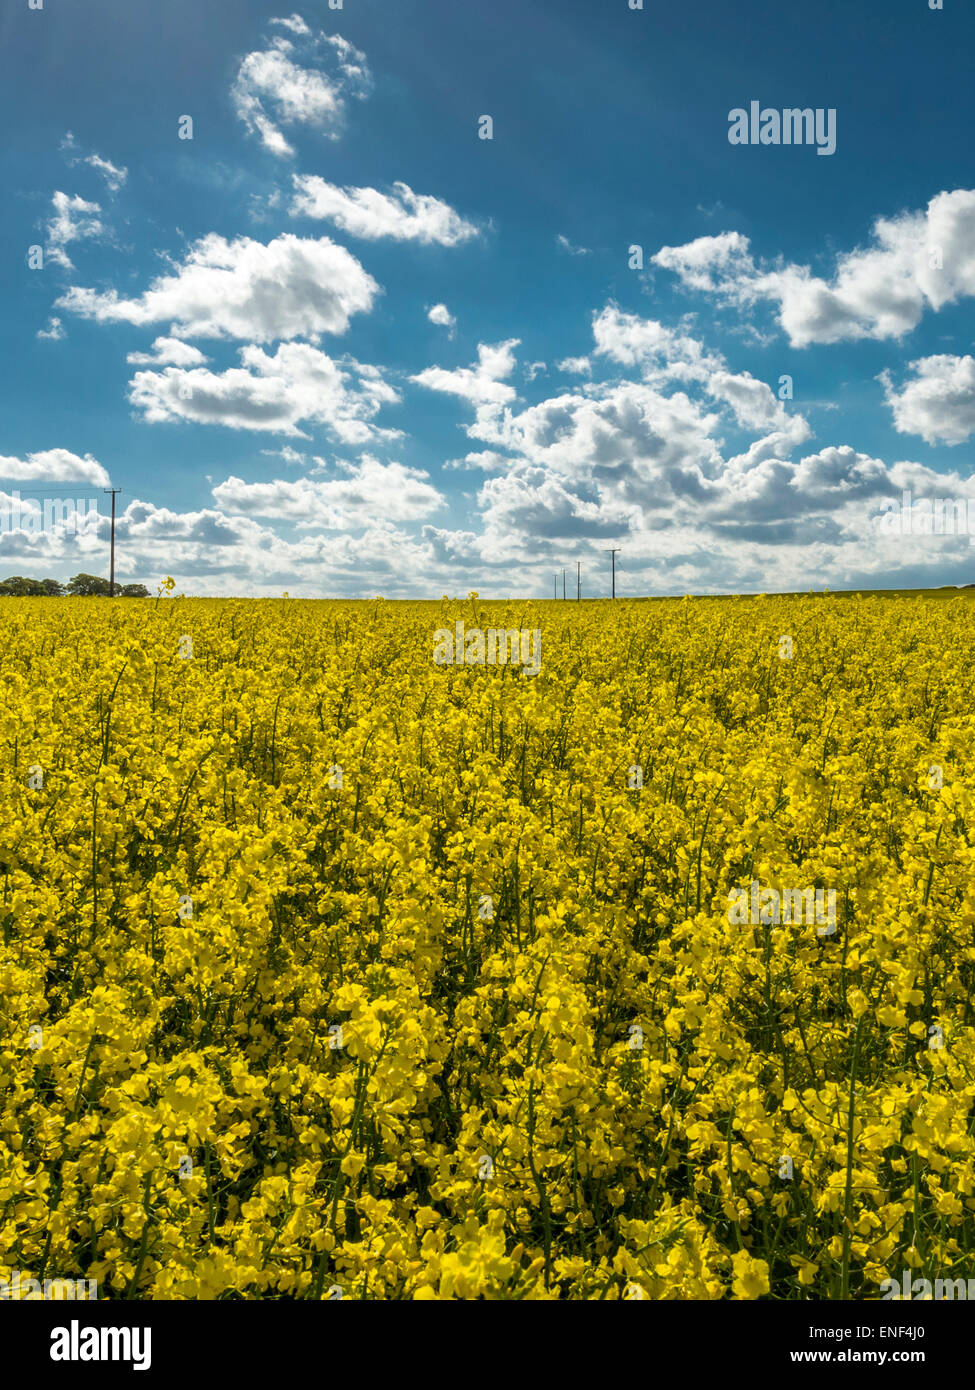 English County Landscape - Storm Clouds over Golden Rapeseed Field Stock Photo